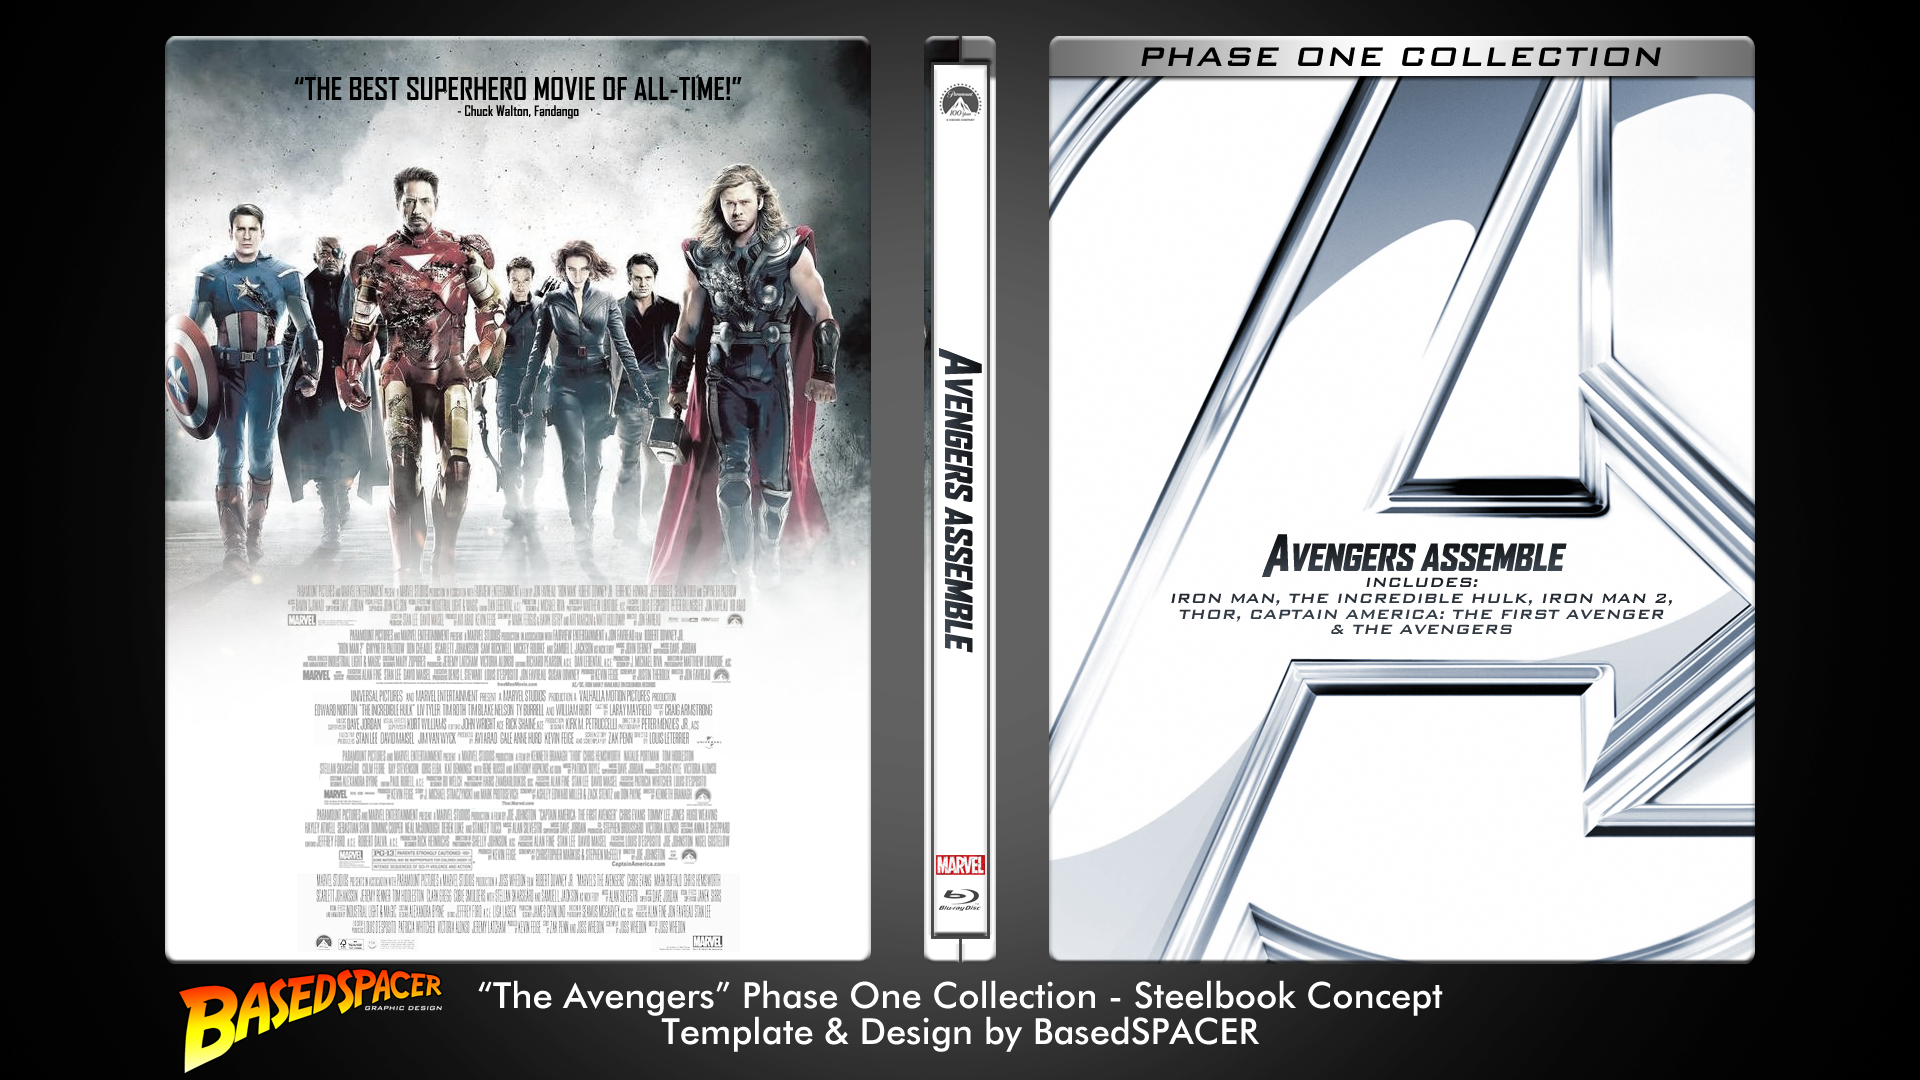 Avengers Assemble - Phase One Collection box cover